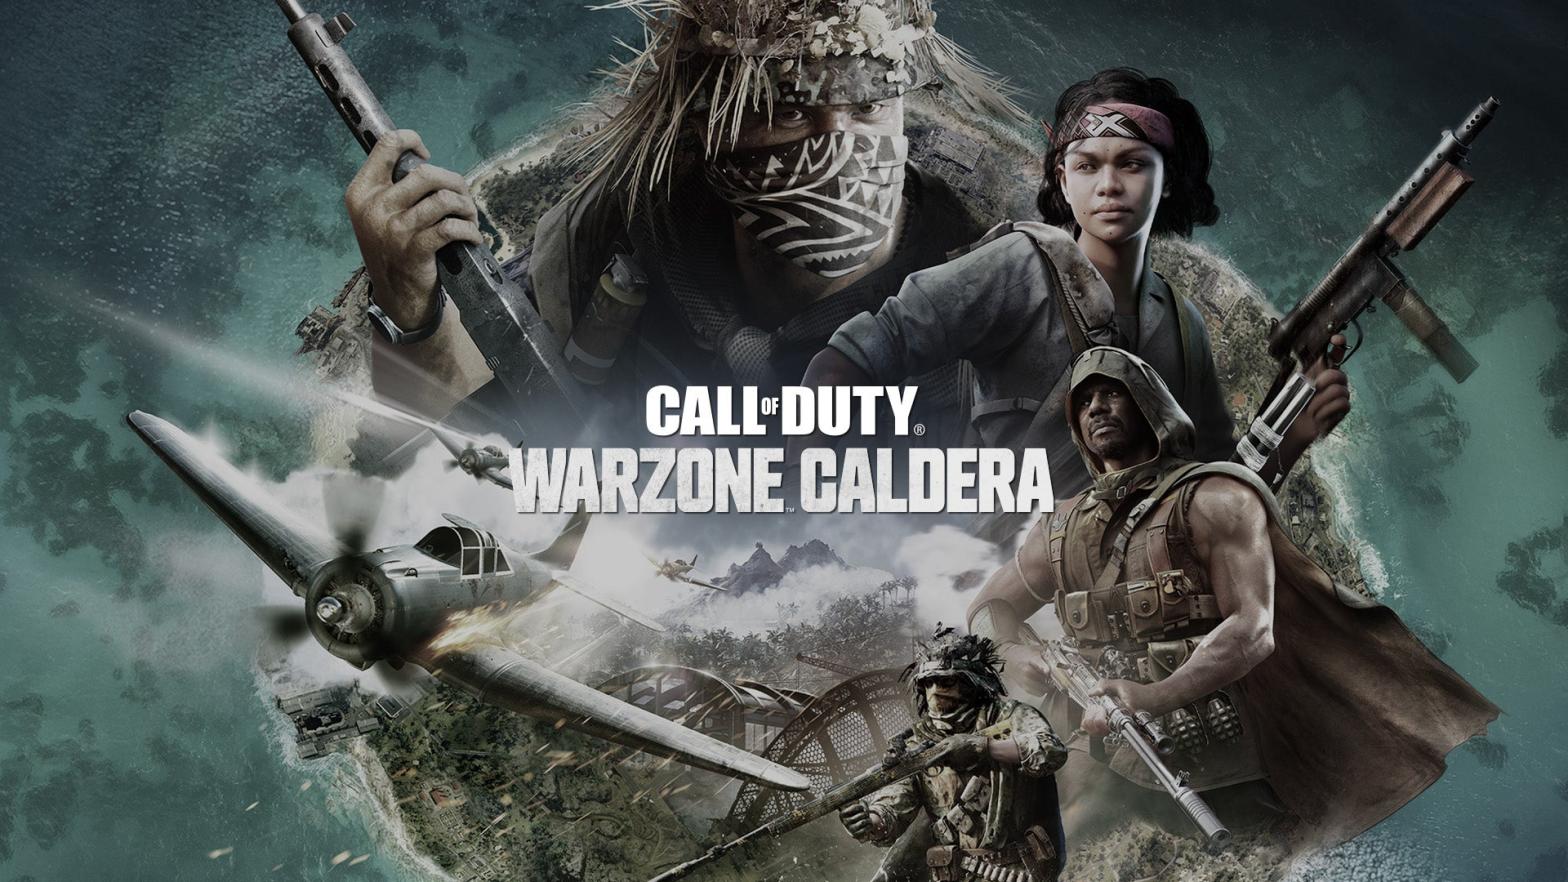 Image: Activision